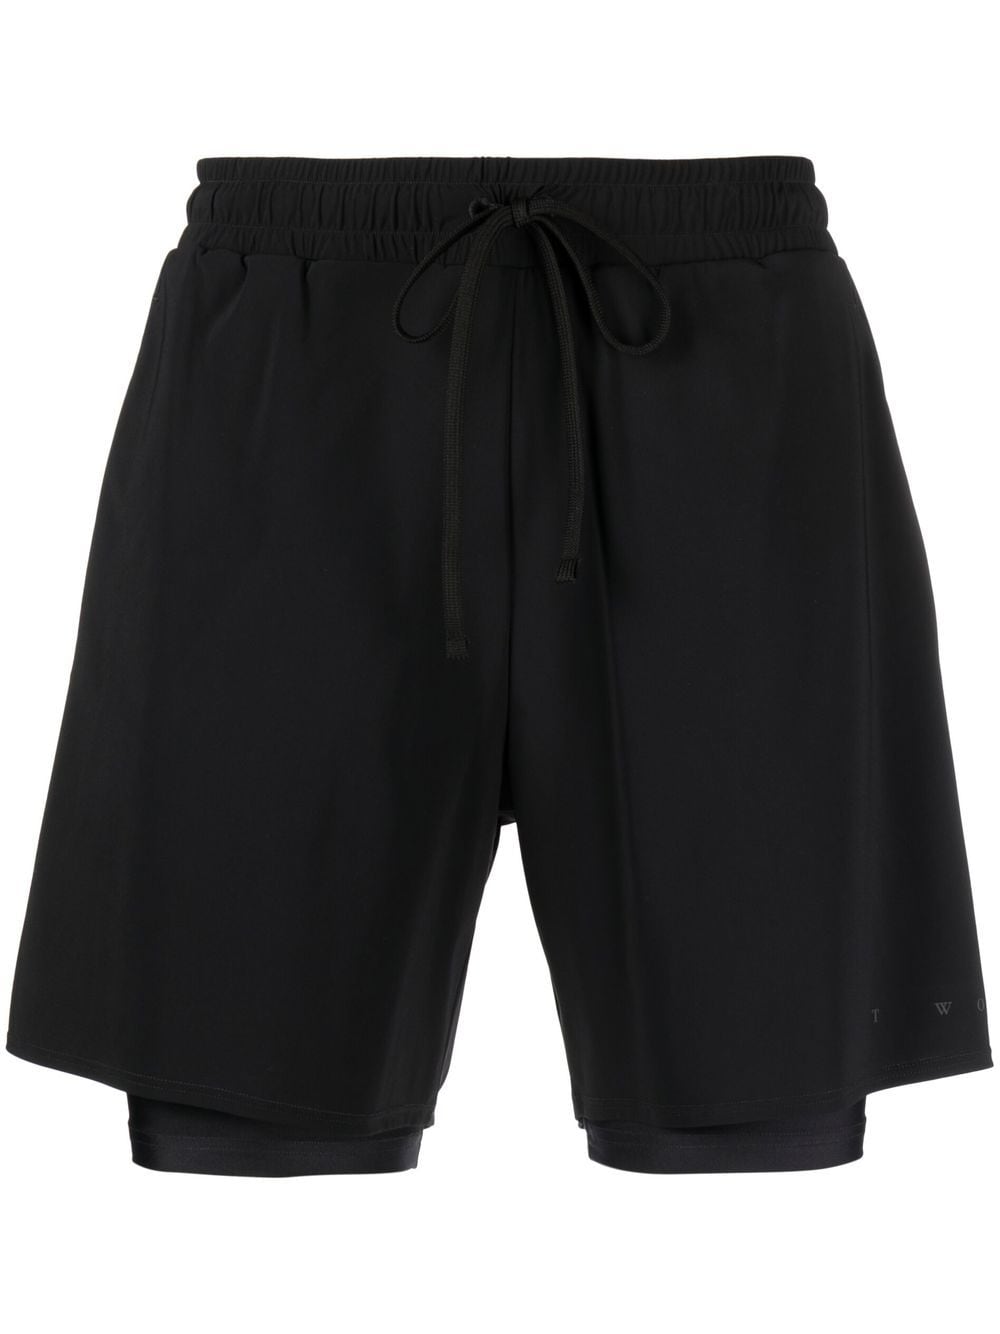 There Was One double-layered running shorts - Black von There Was One